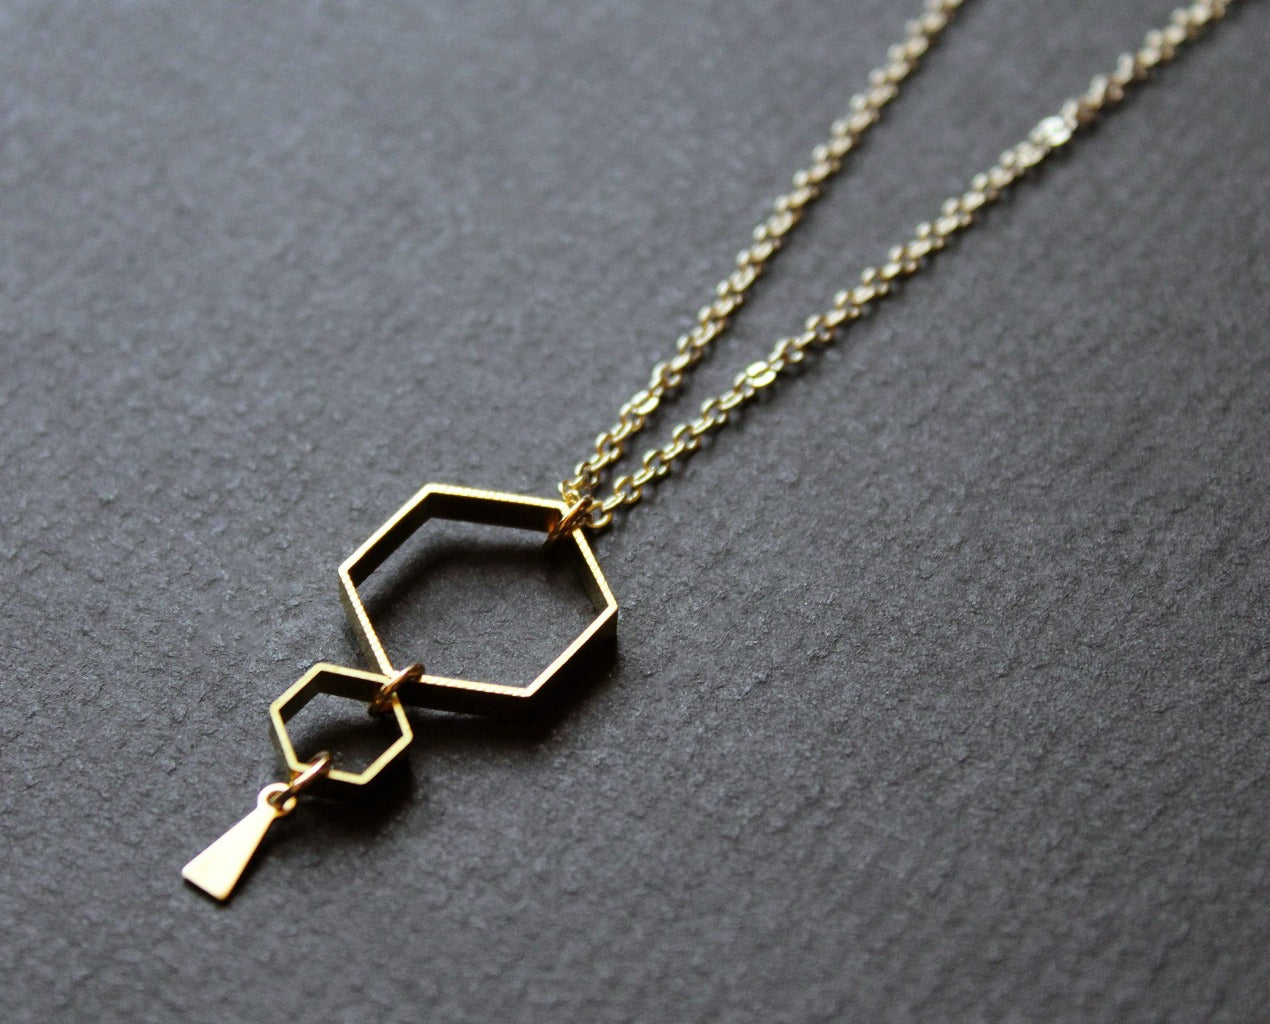 Hive necklace